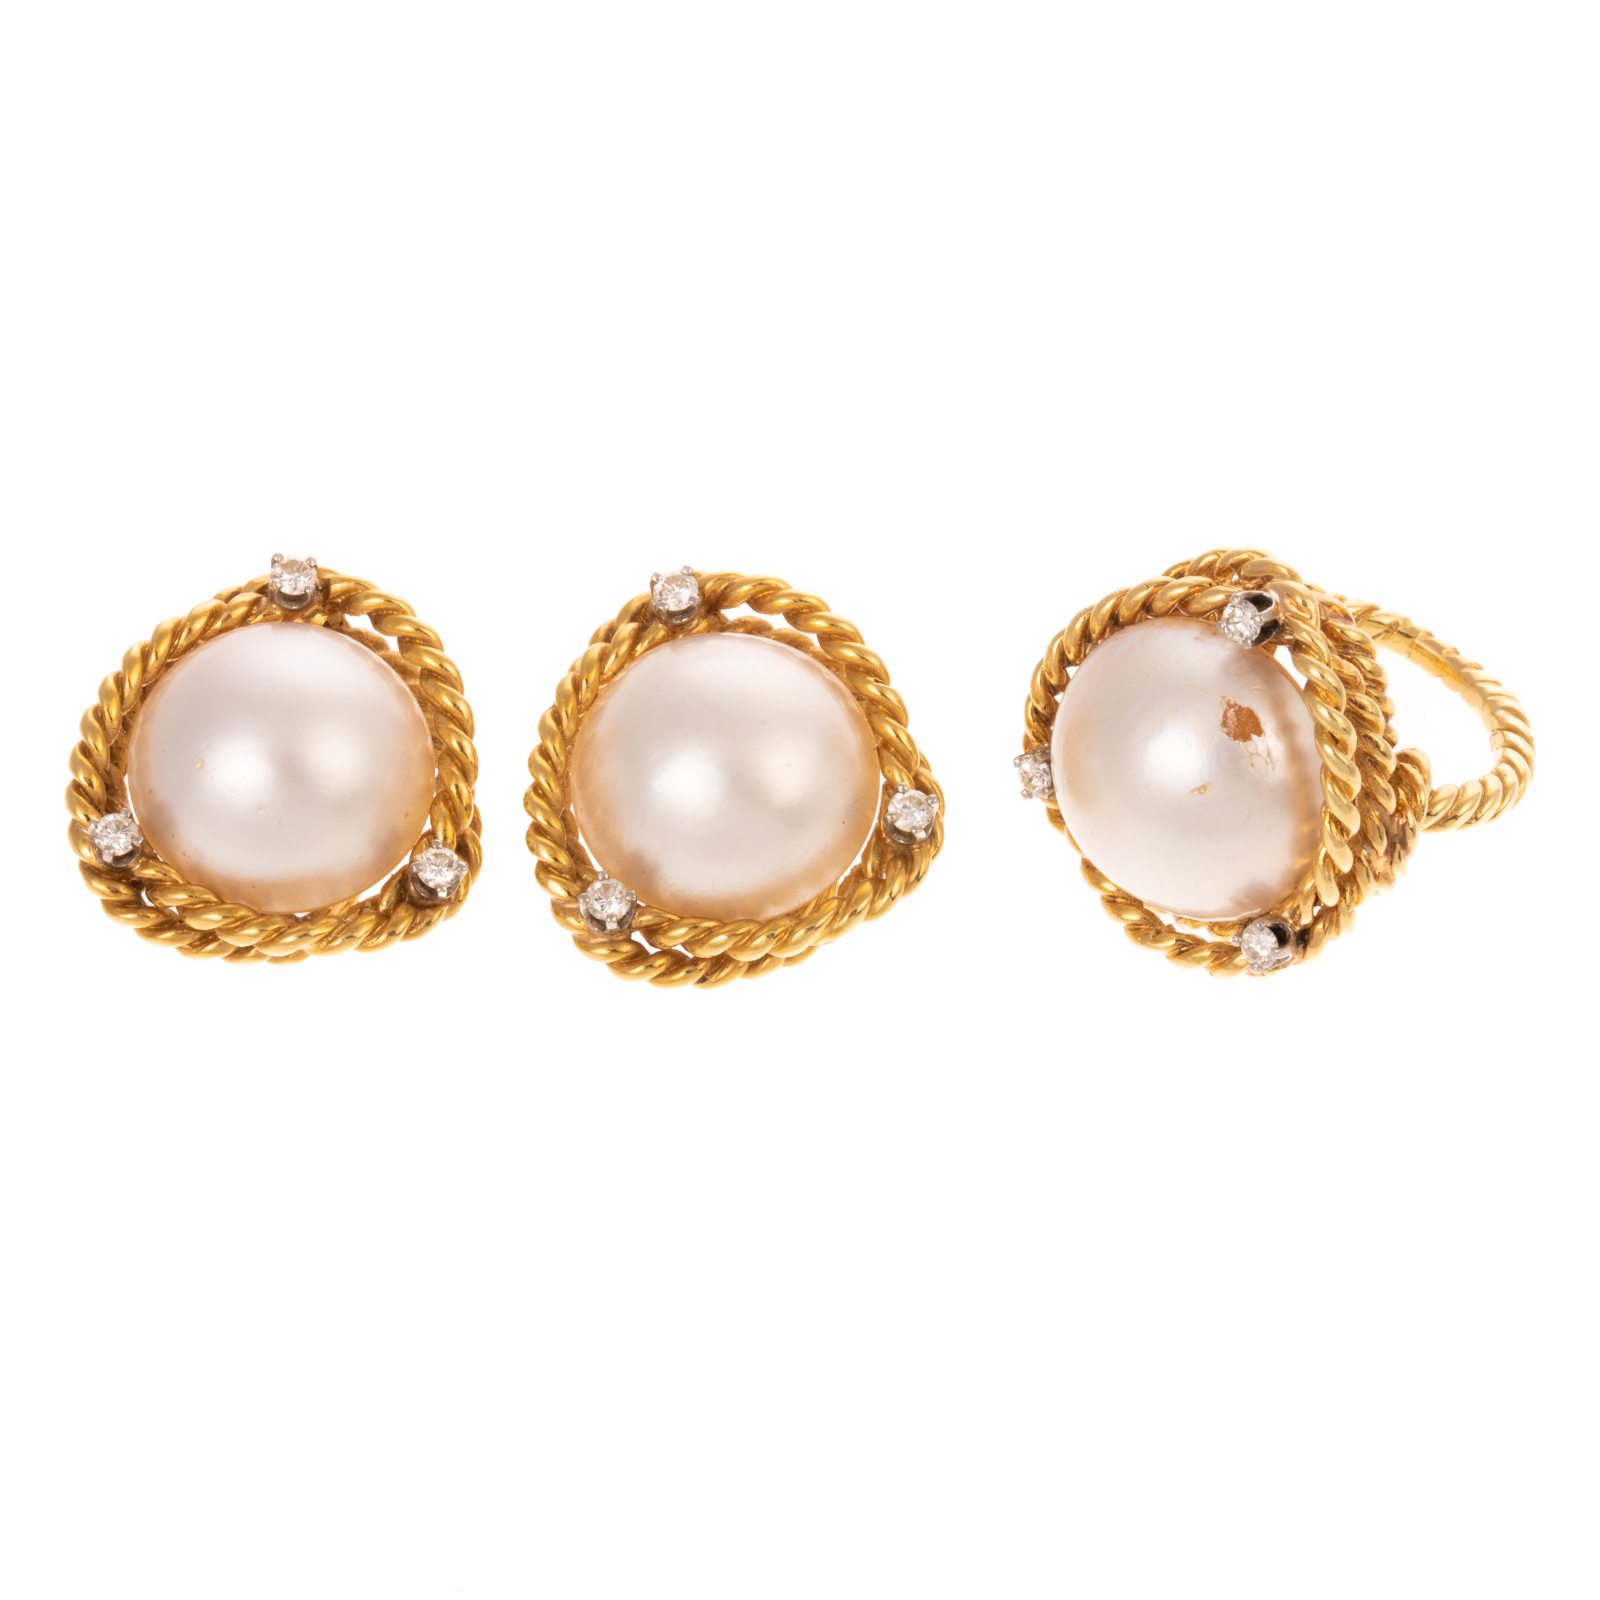 A MABE PEARL RING & EARRINGS IN